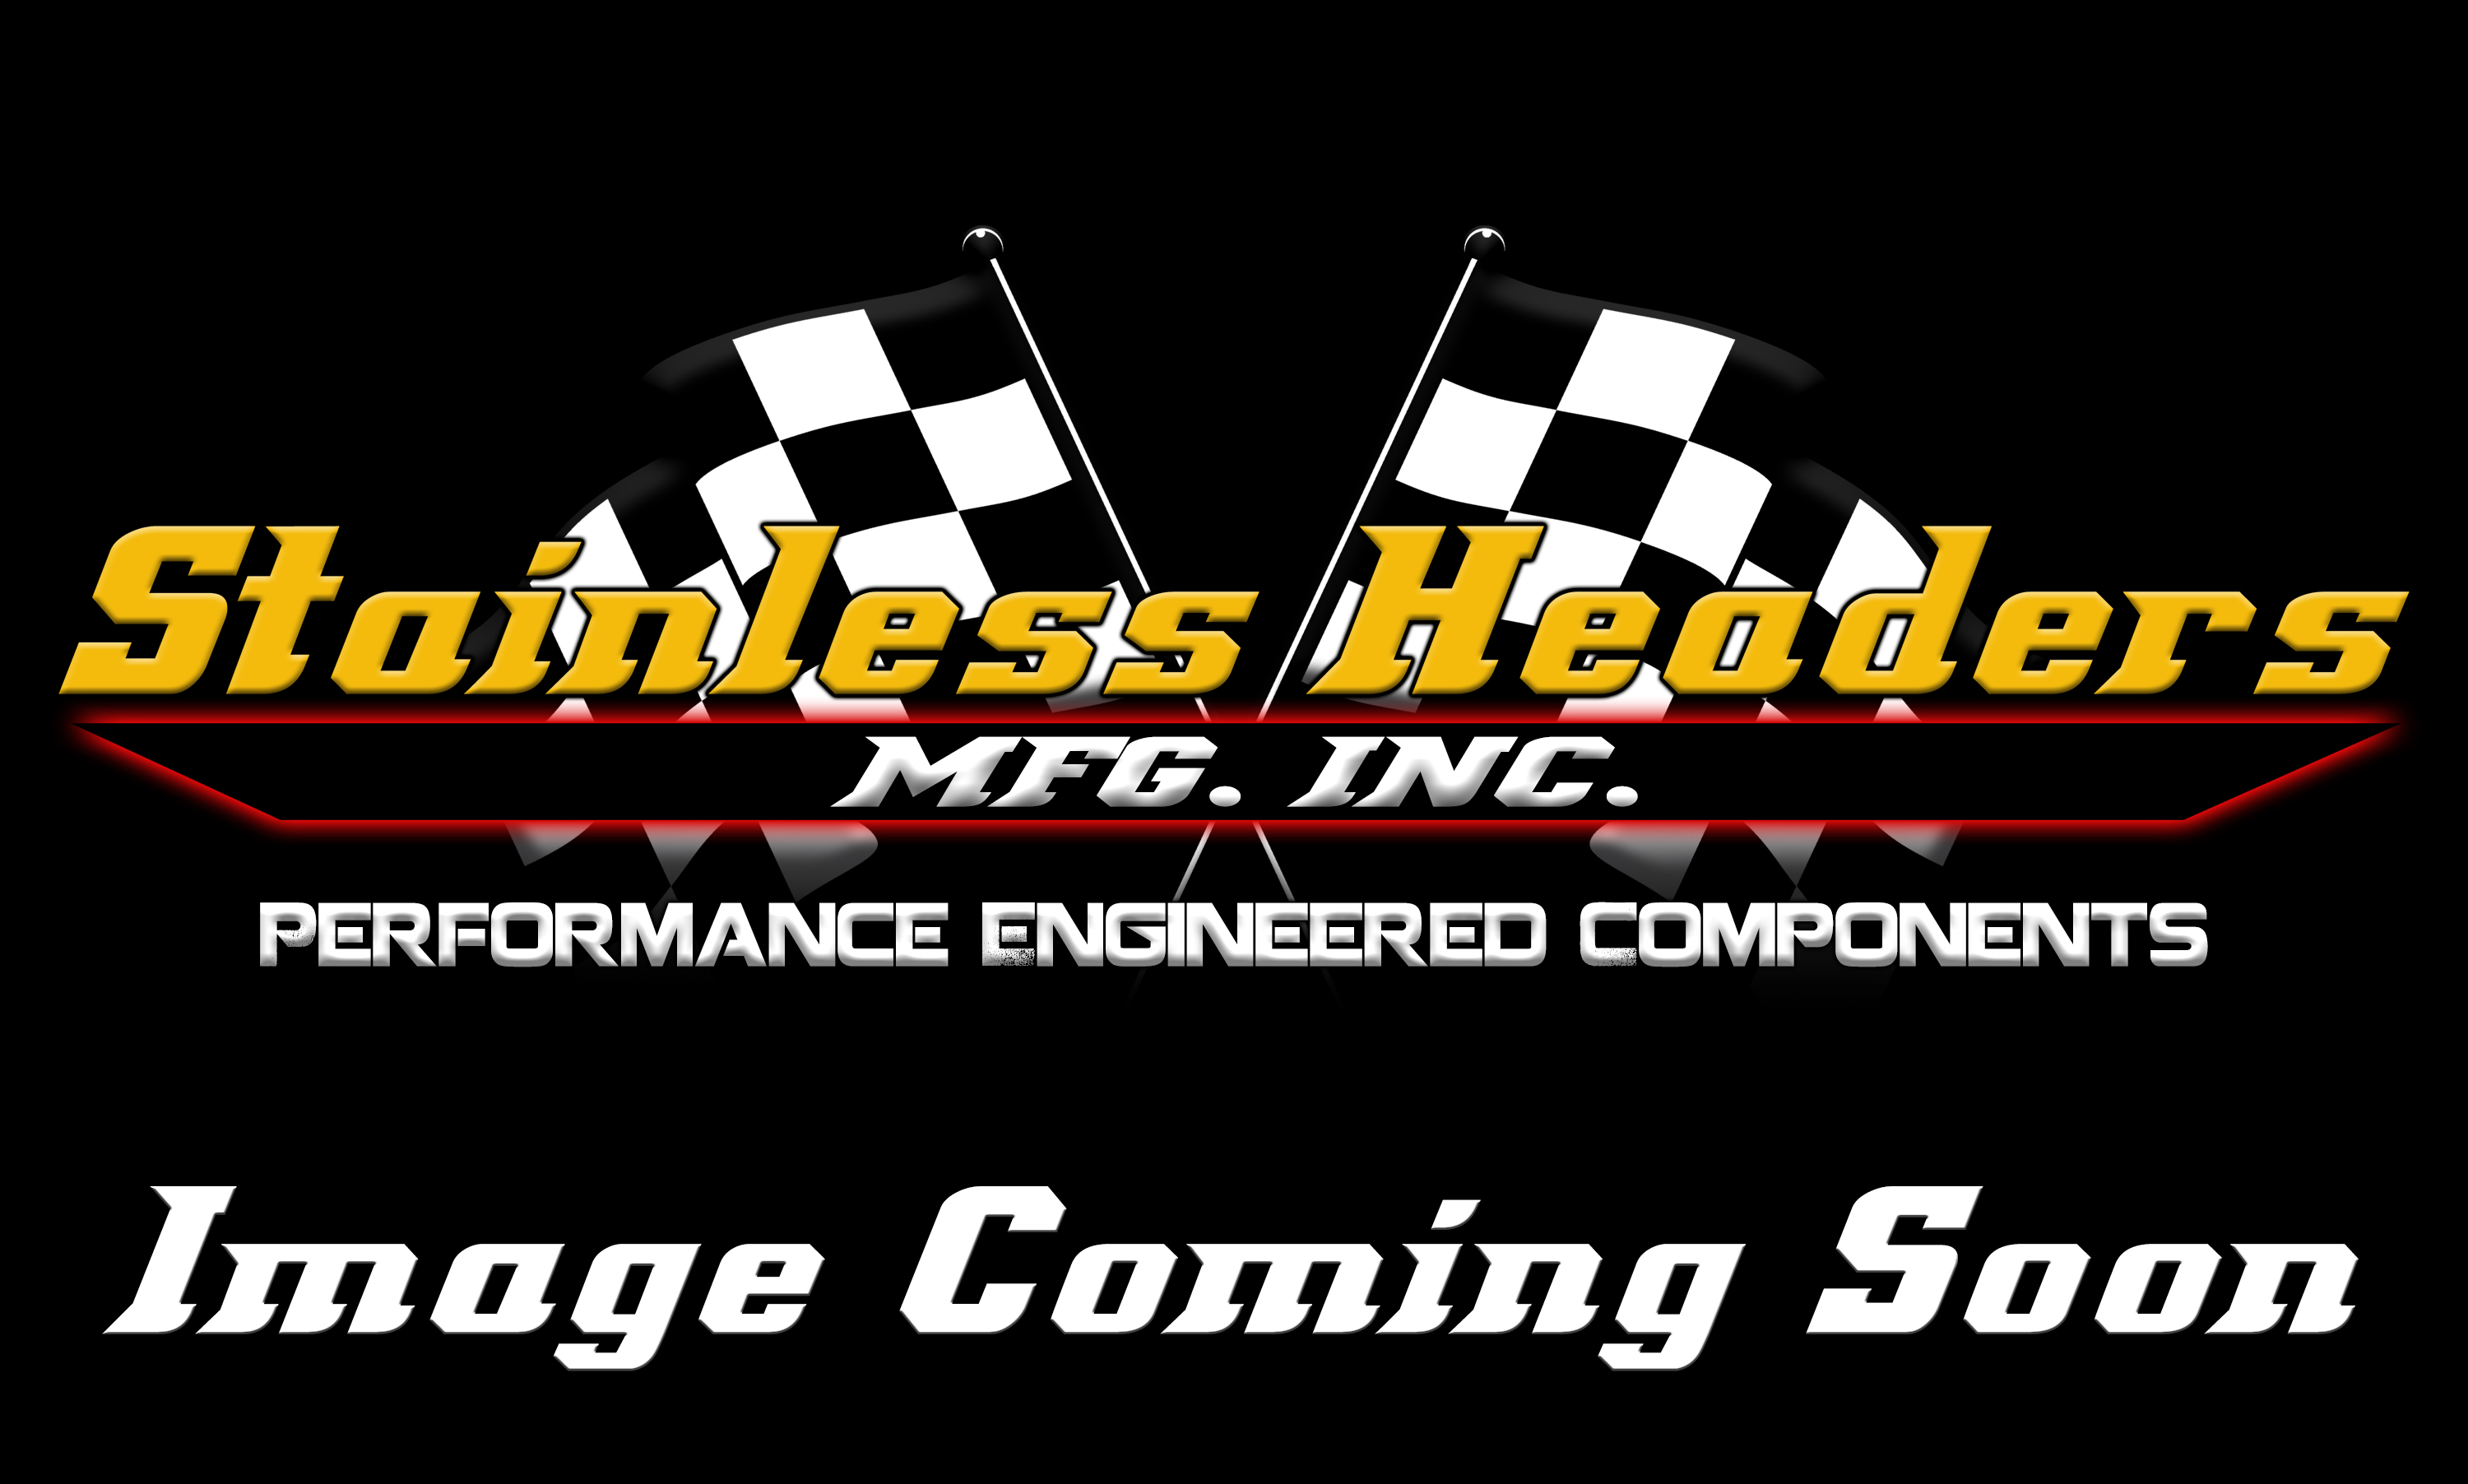 Stainless Headers - 2 1/8" Primary 4 into 1 Performance Merge Collector-16ga 321ss